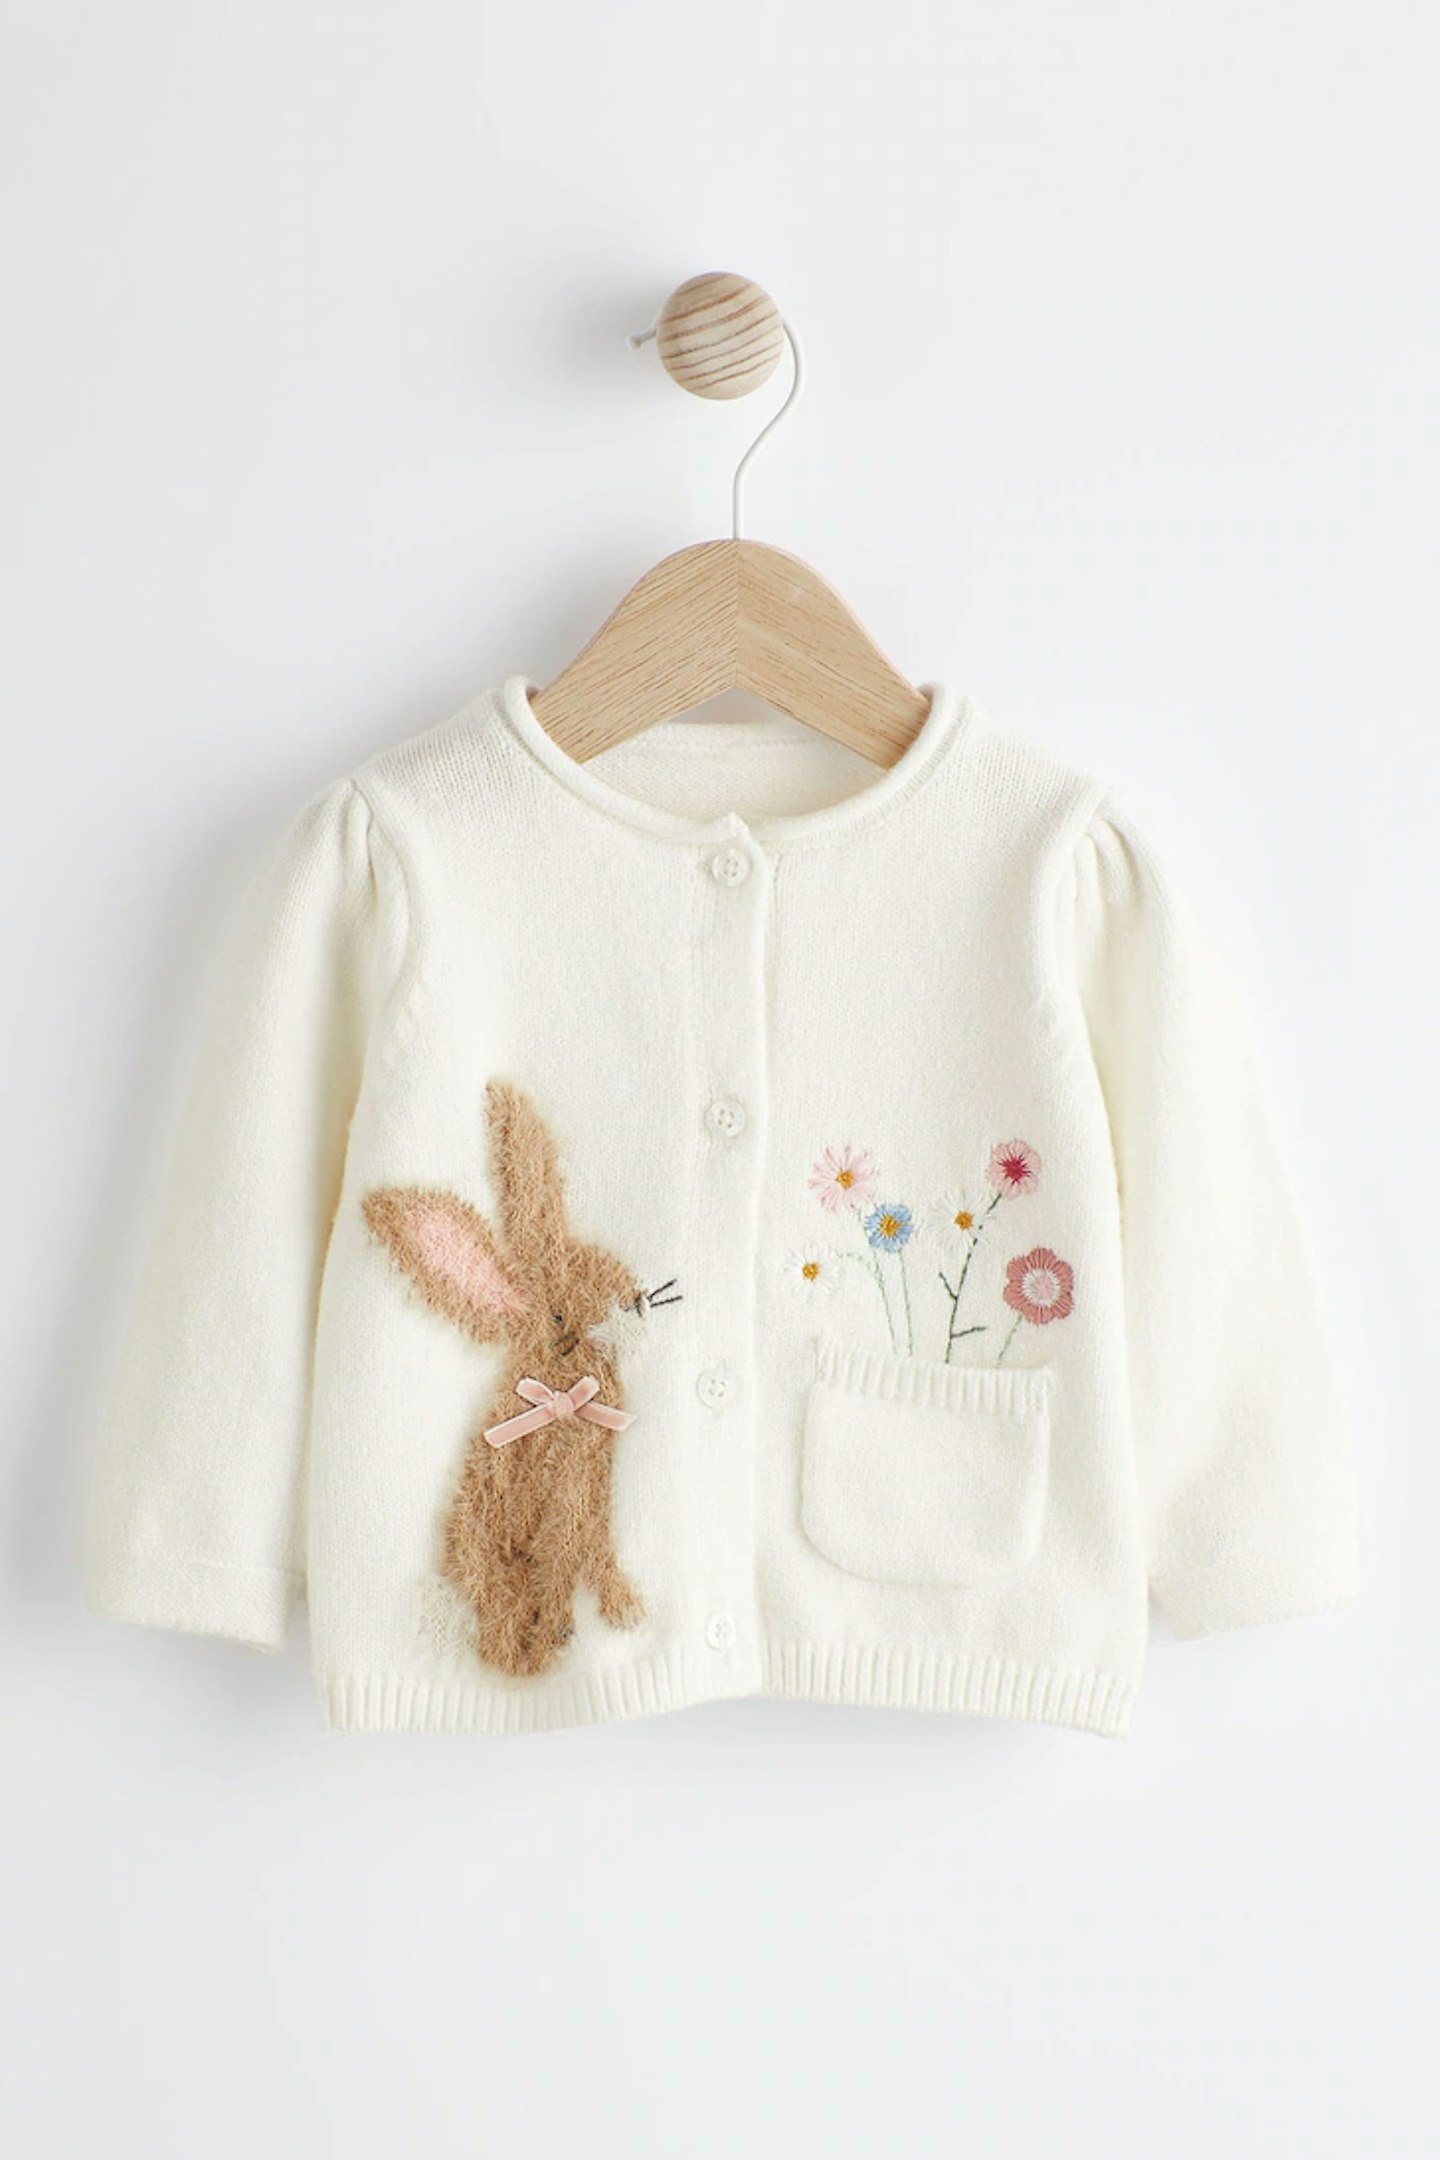 Embroidered Bunny Baby Knitted Cardigan 